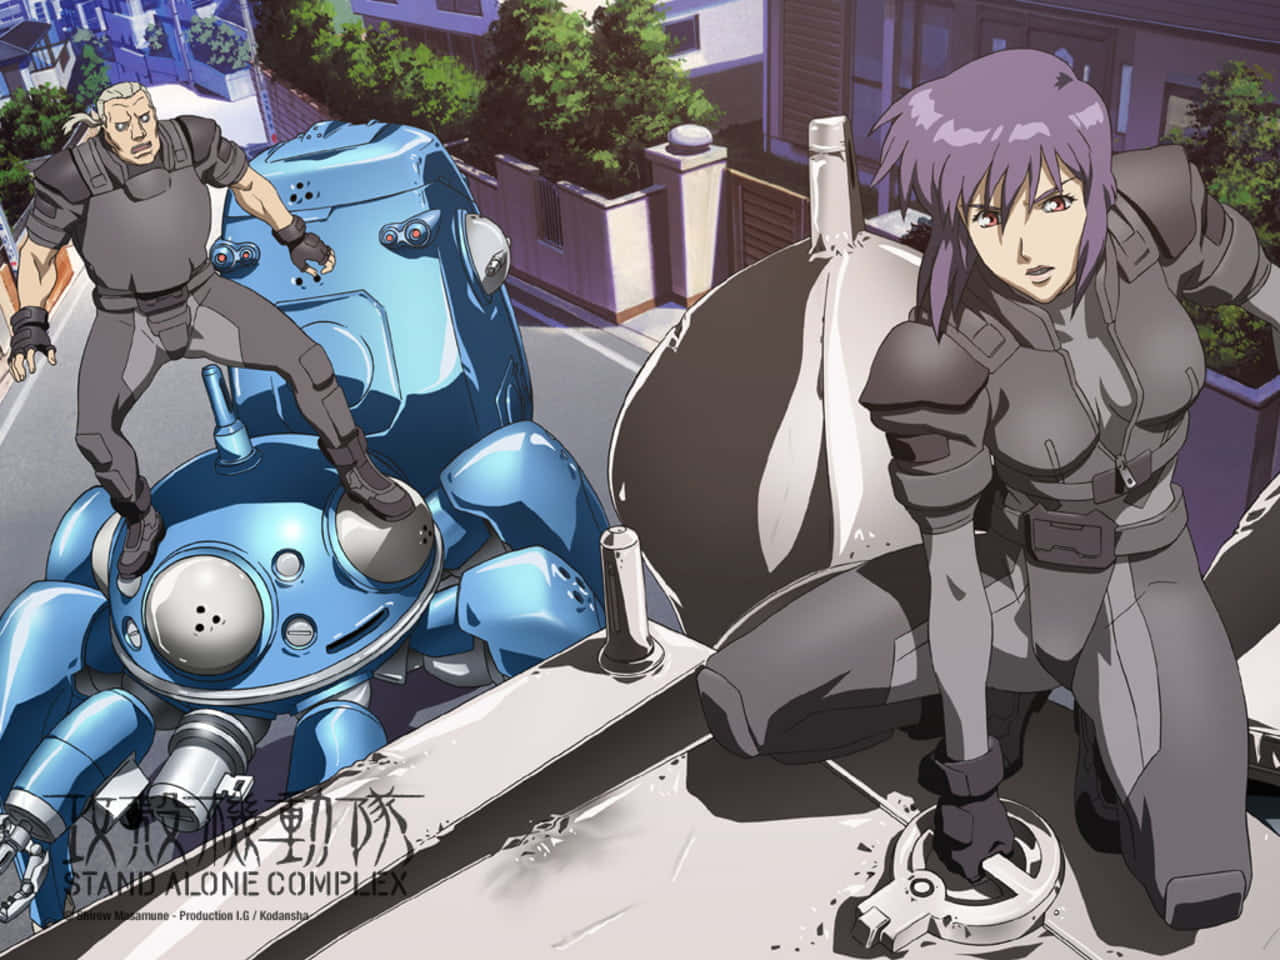 Image  "Ghost In The Shell - The Future Is Now"